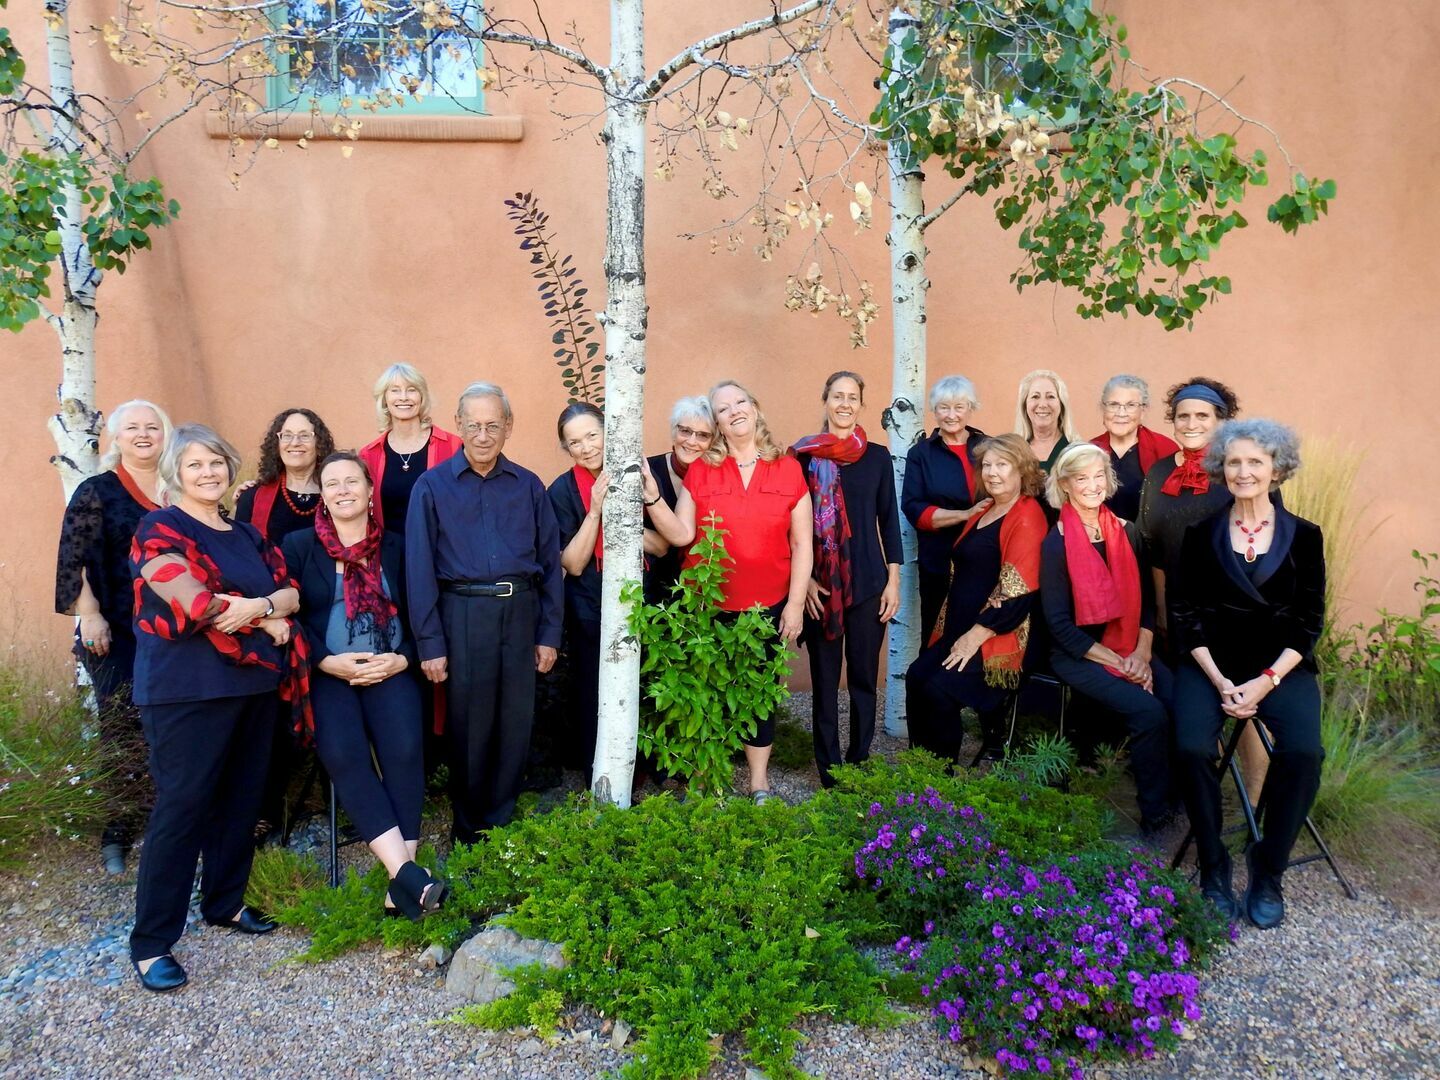 “Giving Voice to Our Song: Music of Joy and Resilience”, Santa Fe, New Mexico, United States